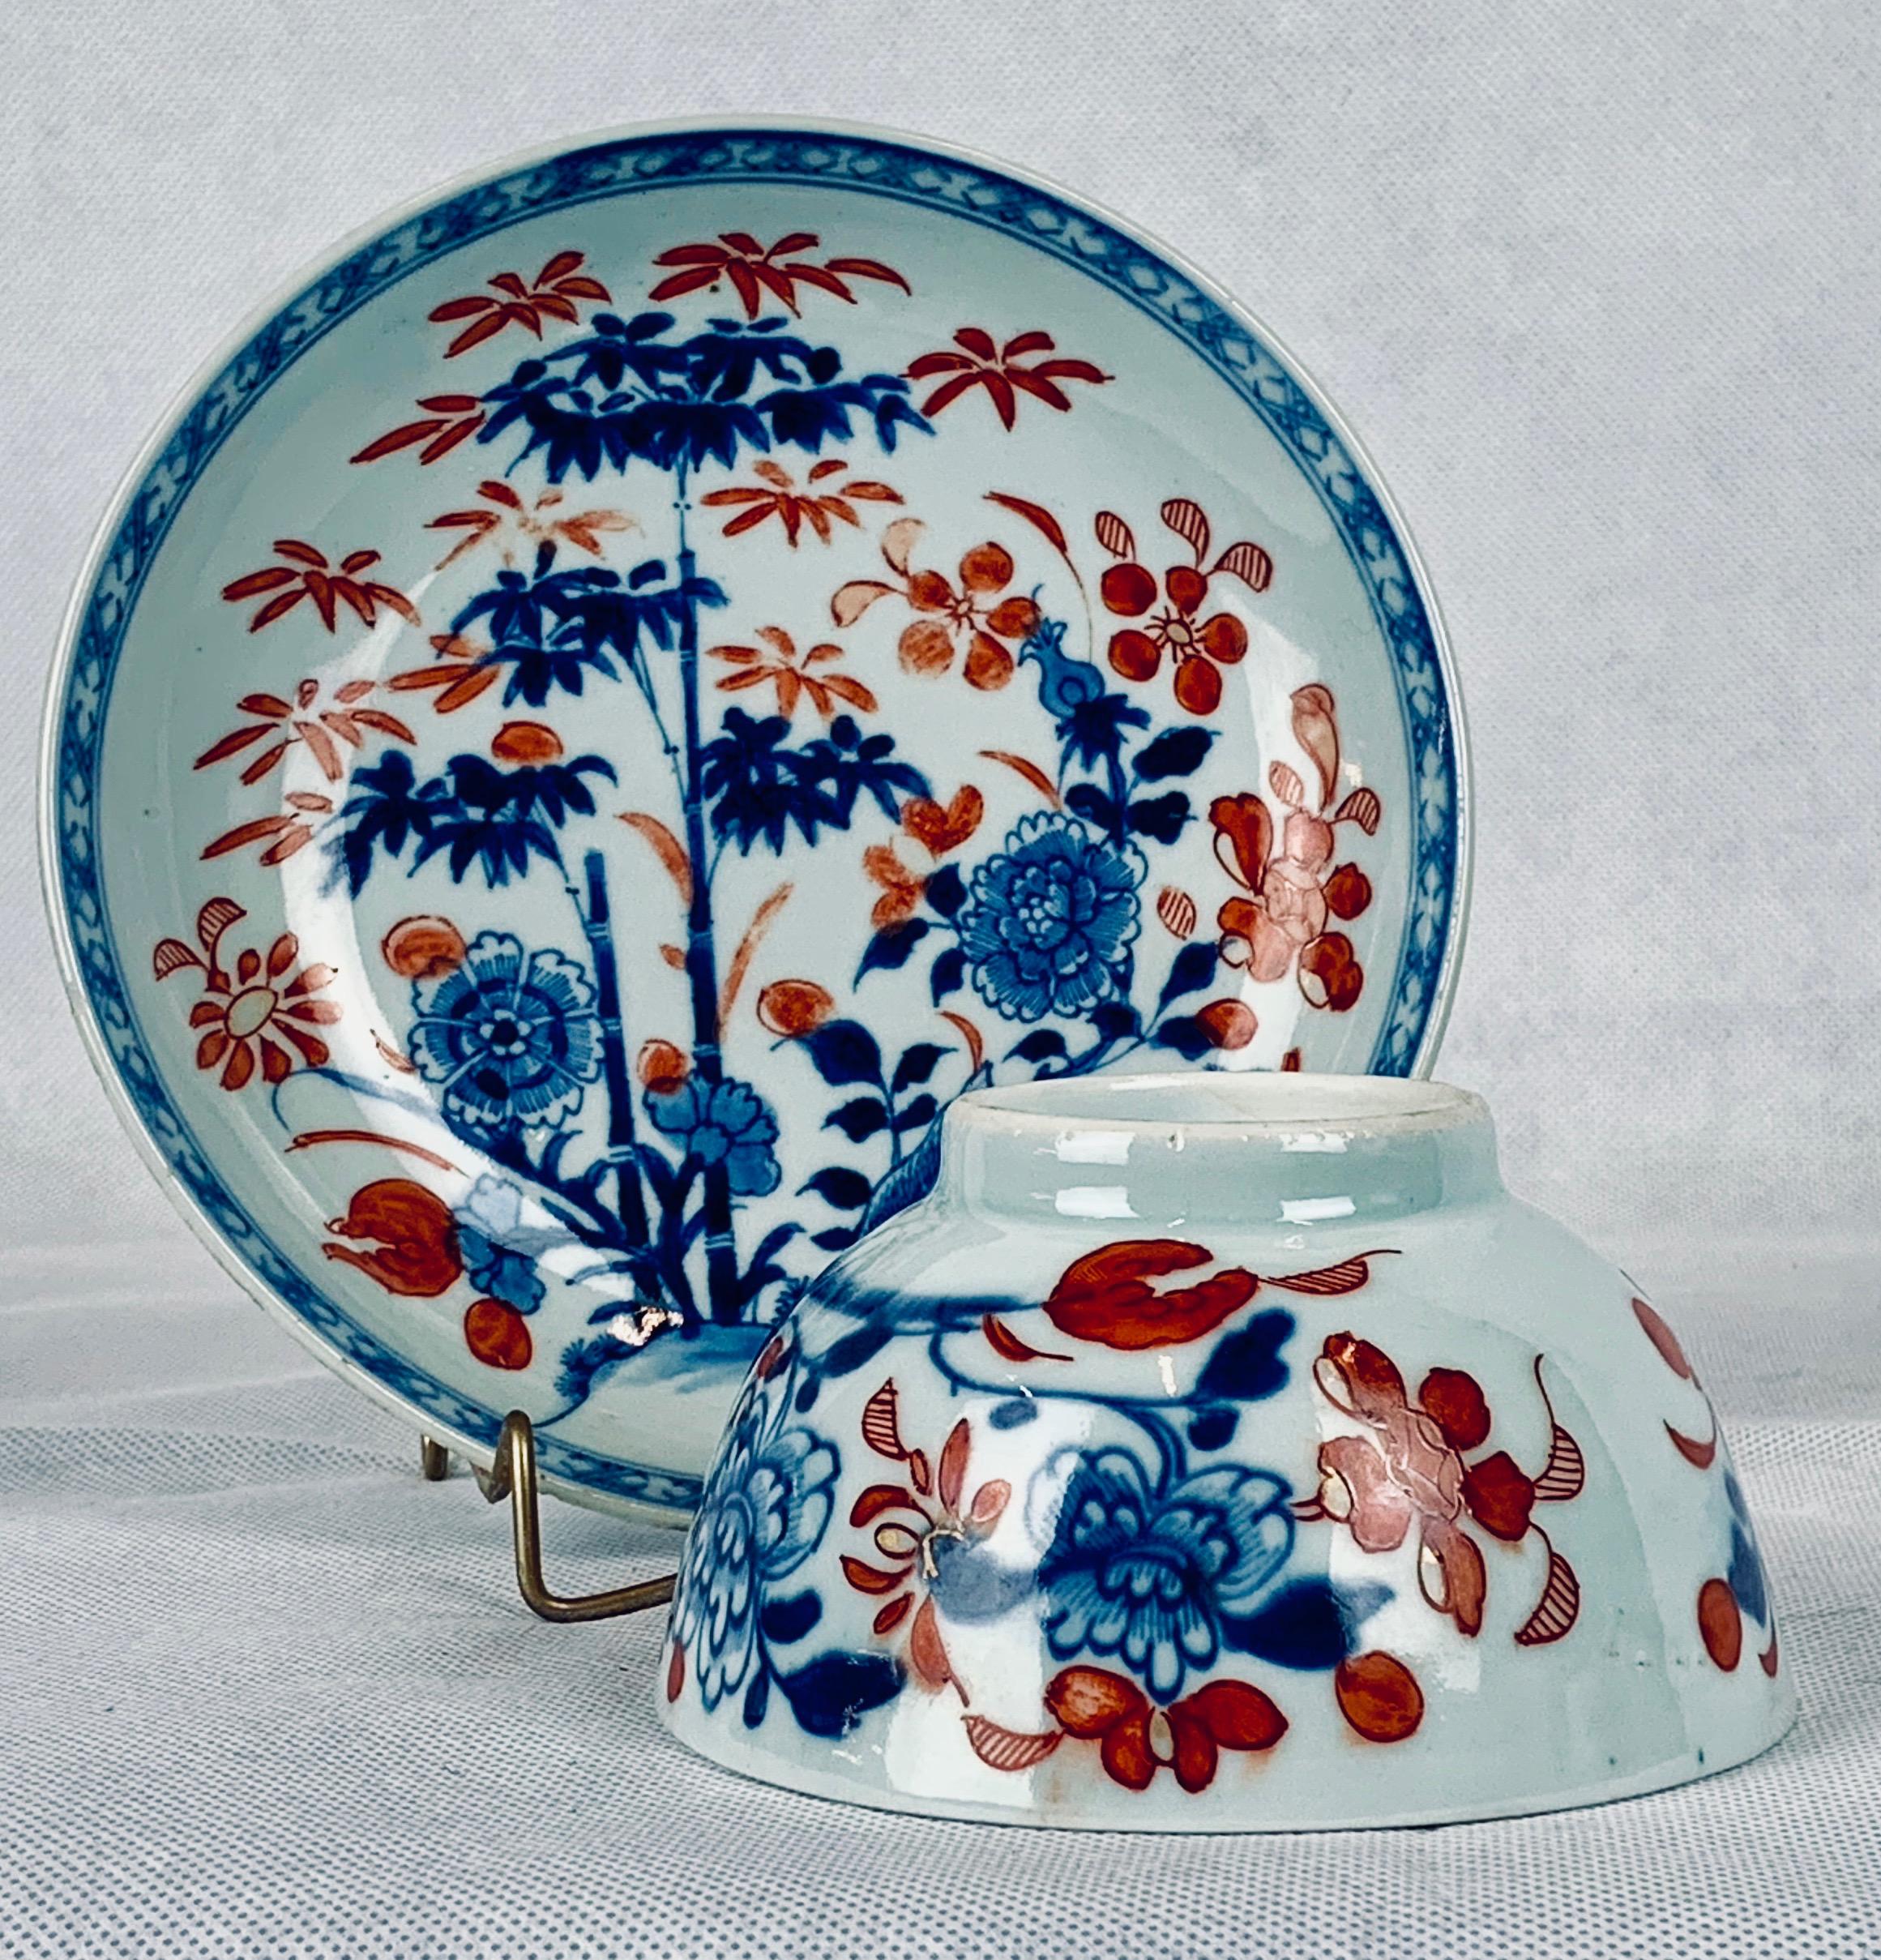 The porcelains made in China in the 18th and 19th centuries that were decorated in iron red and cobalt blue became known as Chinese Imari.  This 18th century porcelain tea bowl and saucer hand decorated in underglaze blue and over painted in iron